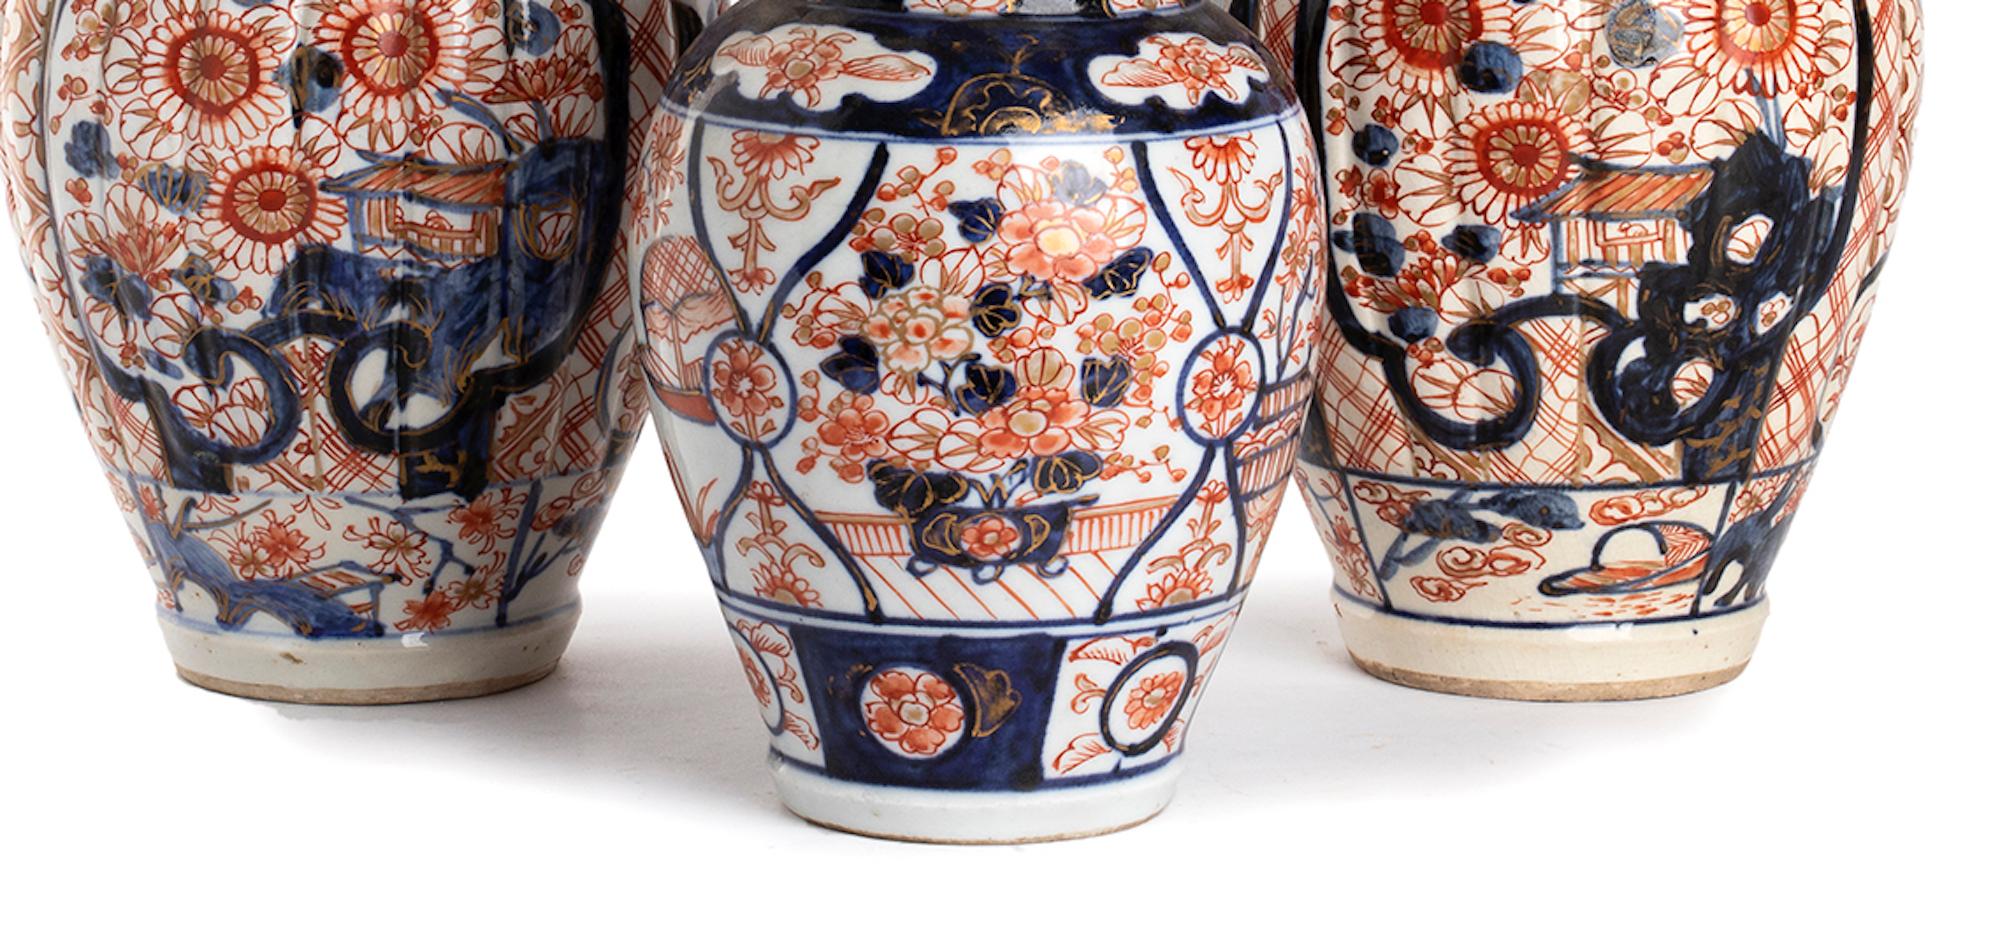 Three Japanese Imari vases is an original precious decorative object realized in Japan in the first years of the 20th century.

Porcelain.

Provenance: Italian Private collection. Good conditions. 

Beautiful and precious objects realized in